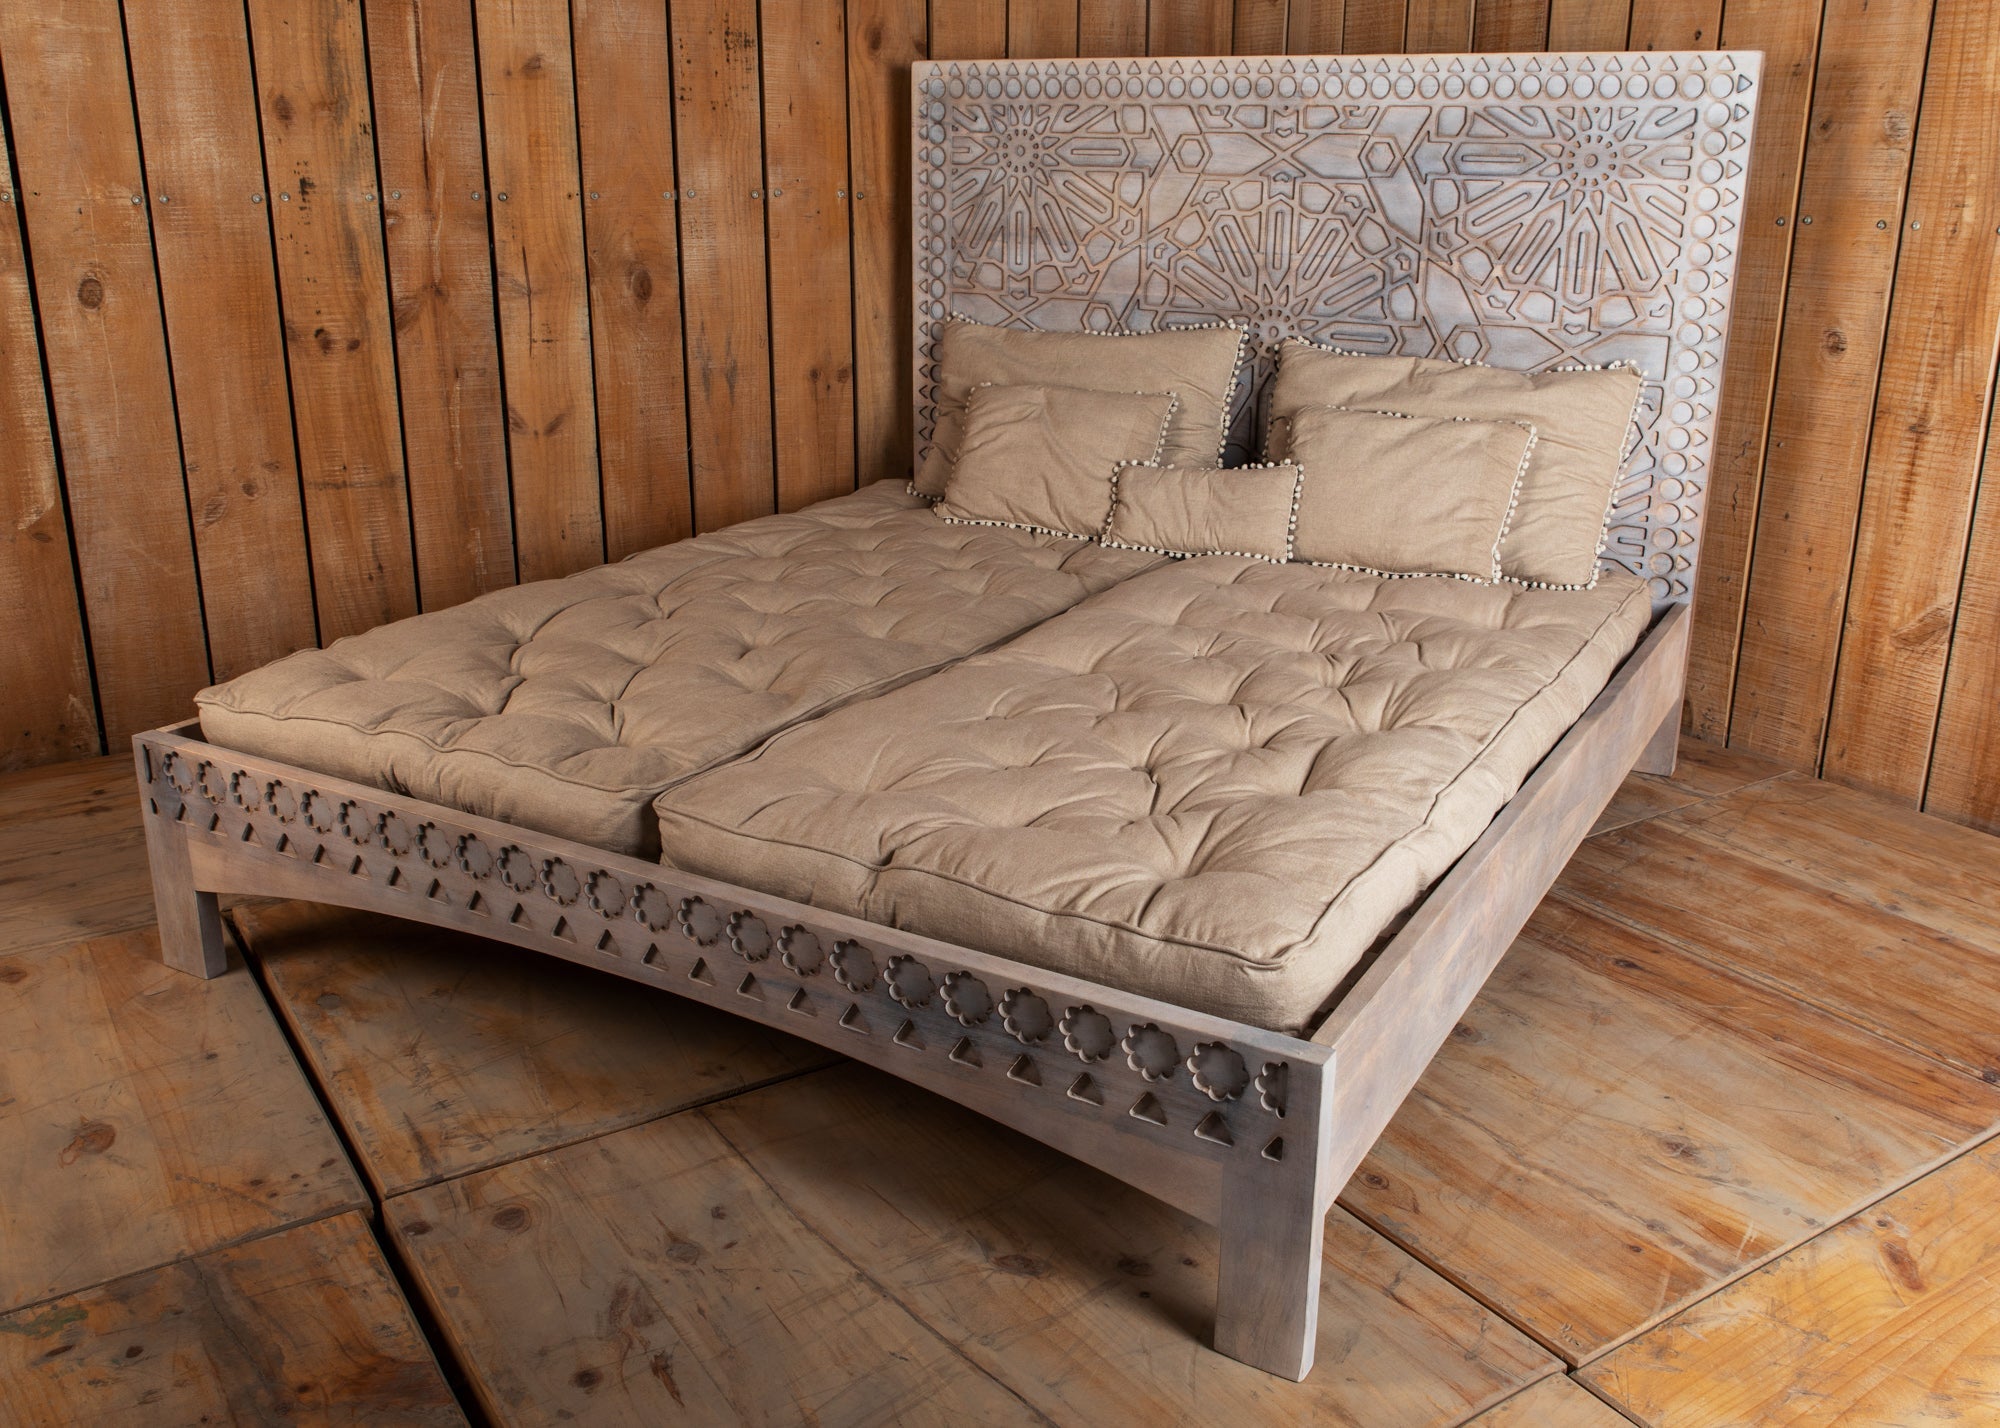 Marrakesh Bed - Savana Living - One With Wood